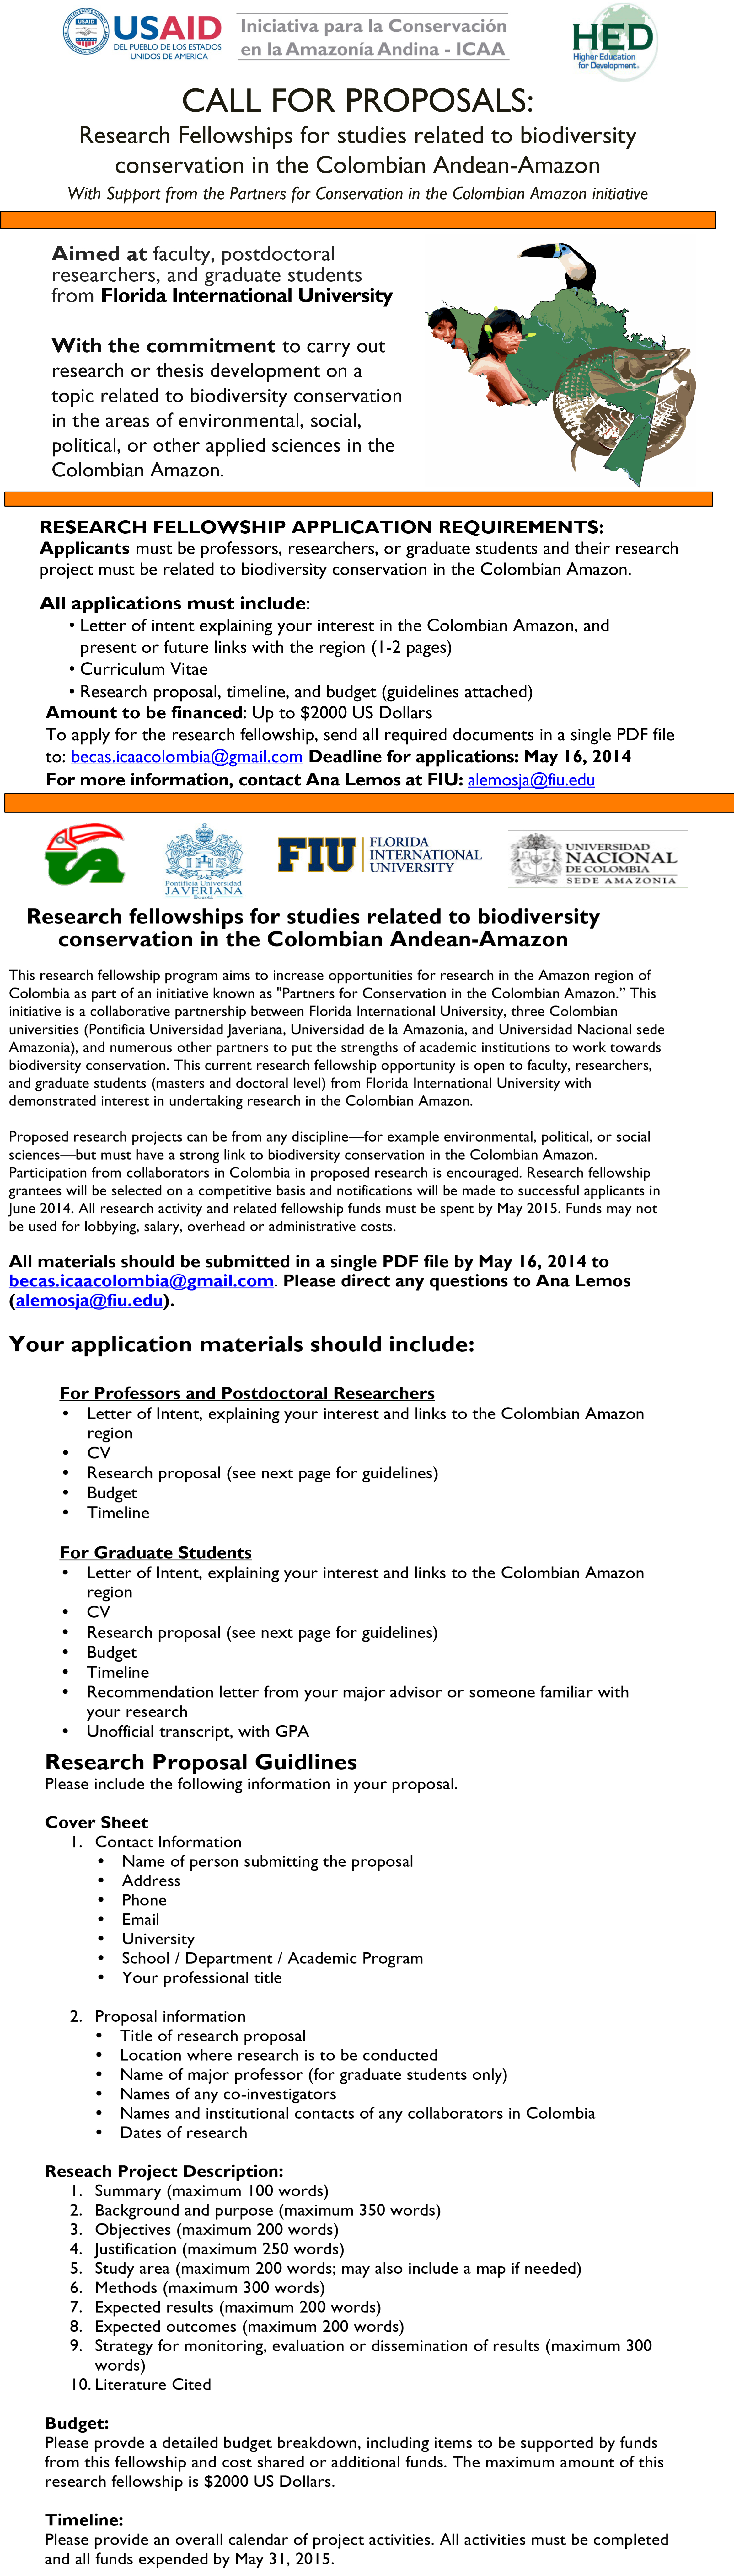 Research Fellowship Colombian Andean-Amazon